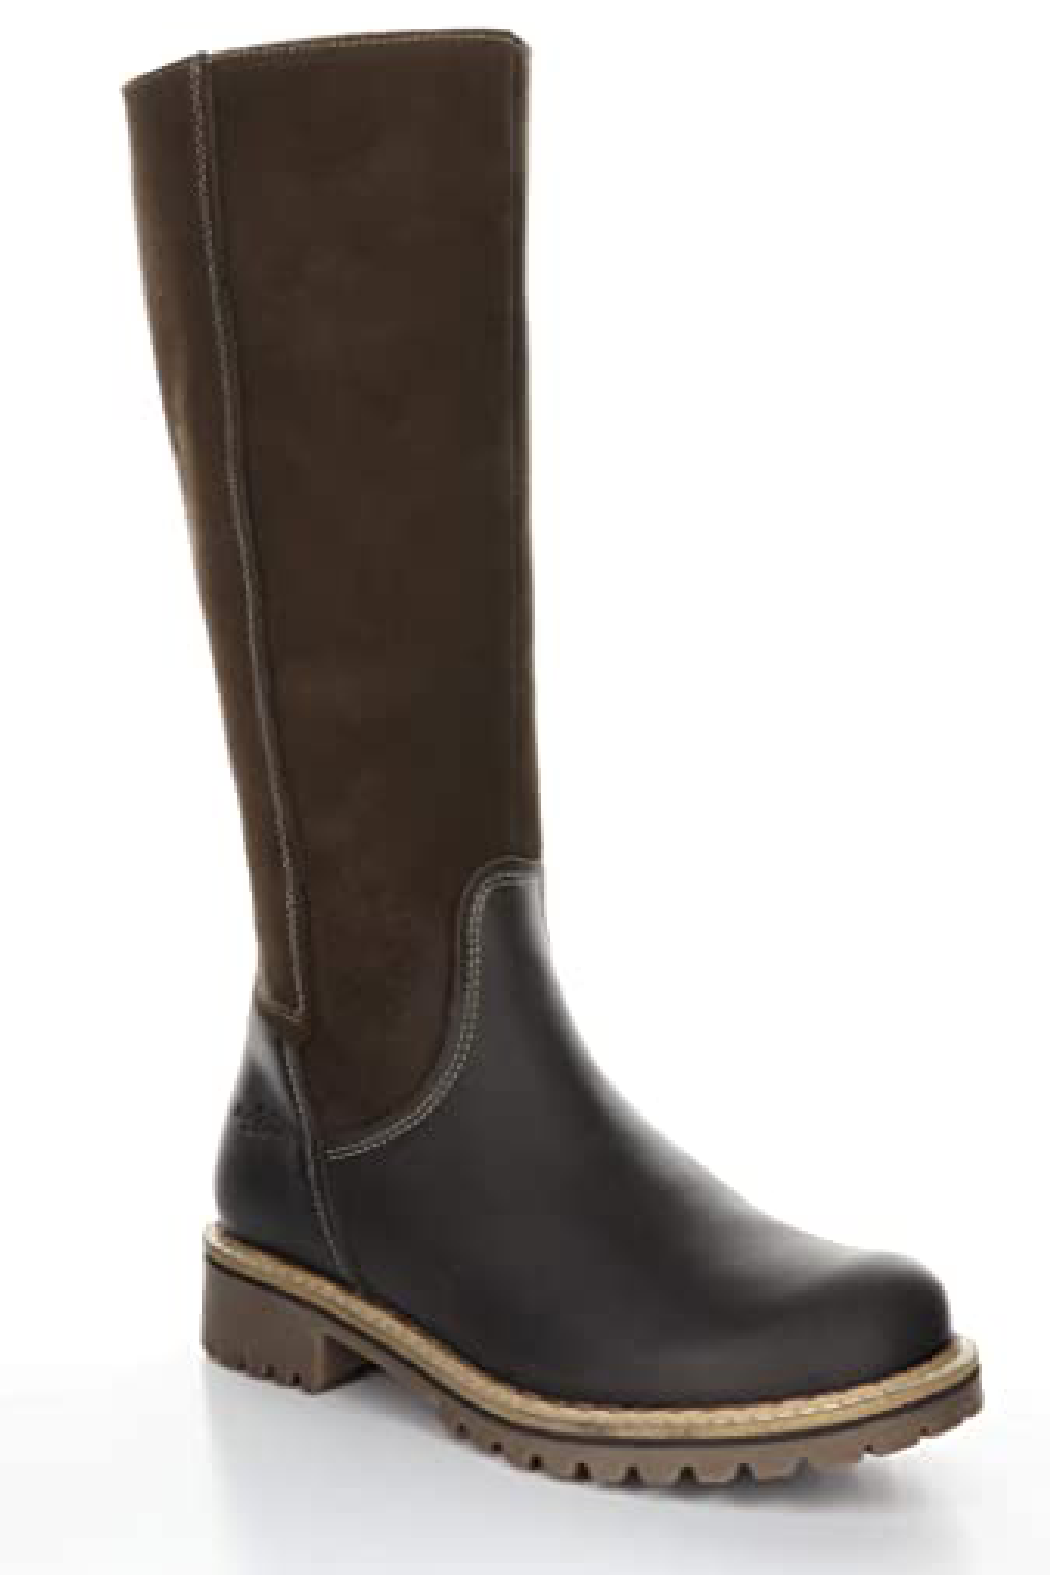 Bos And Co Hudson Boot